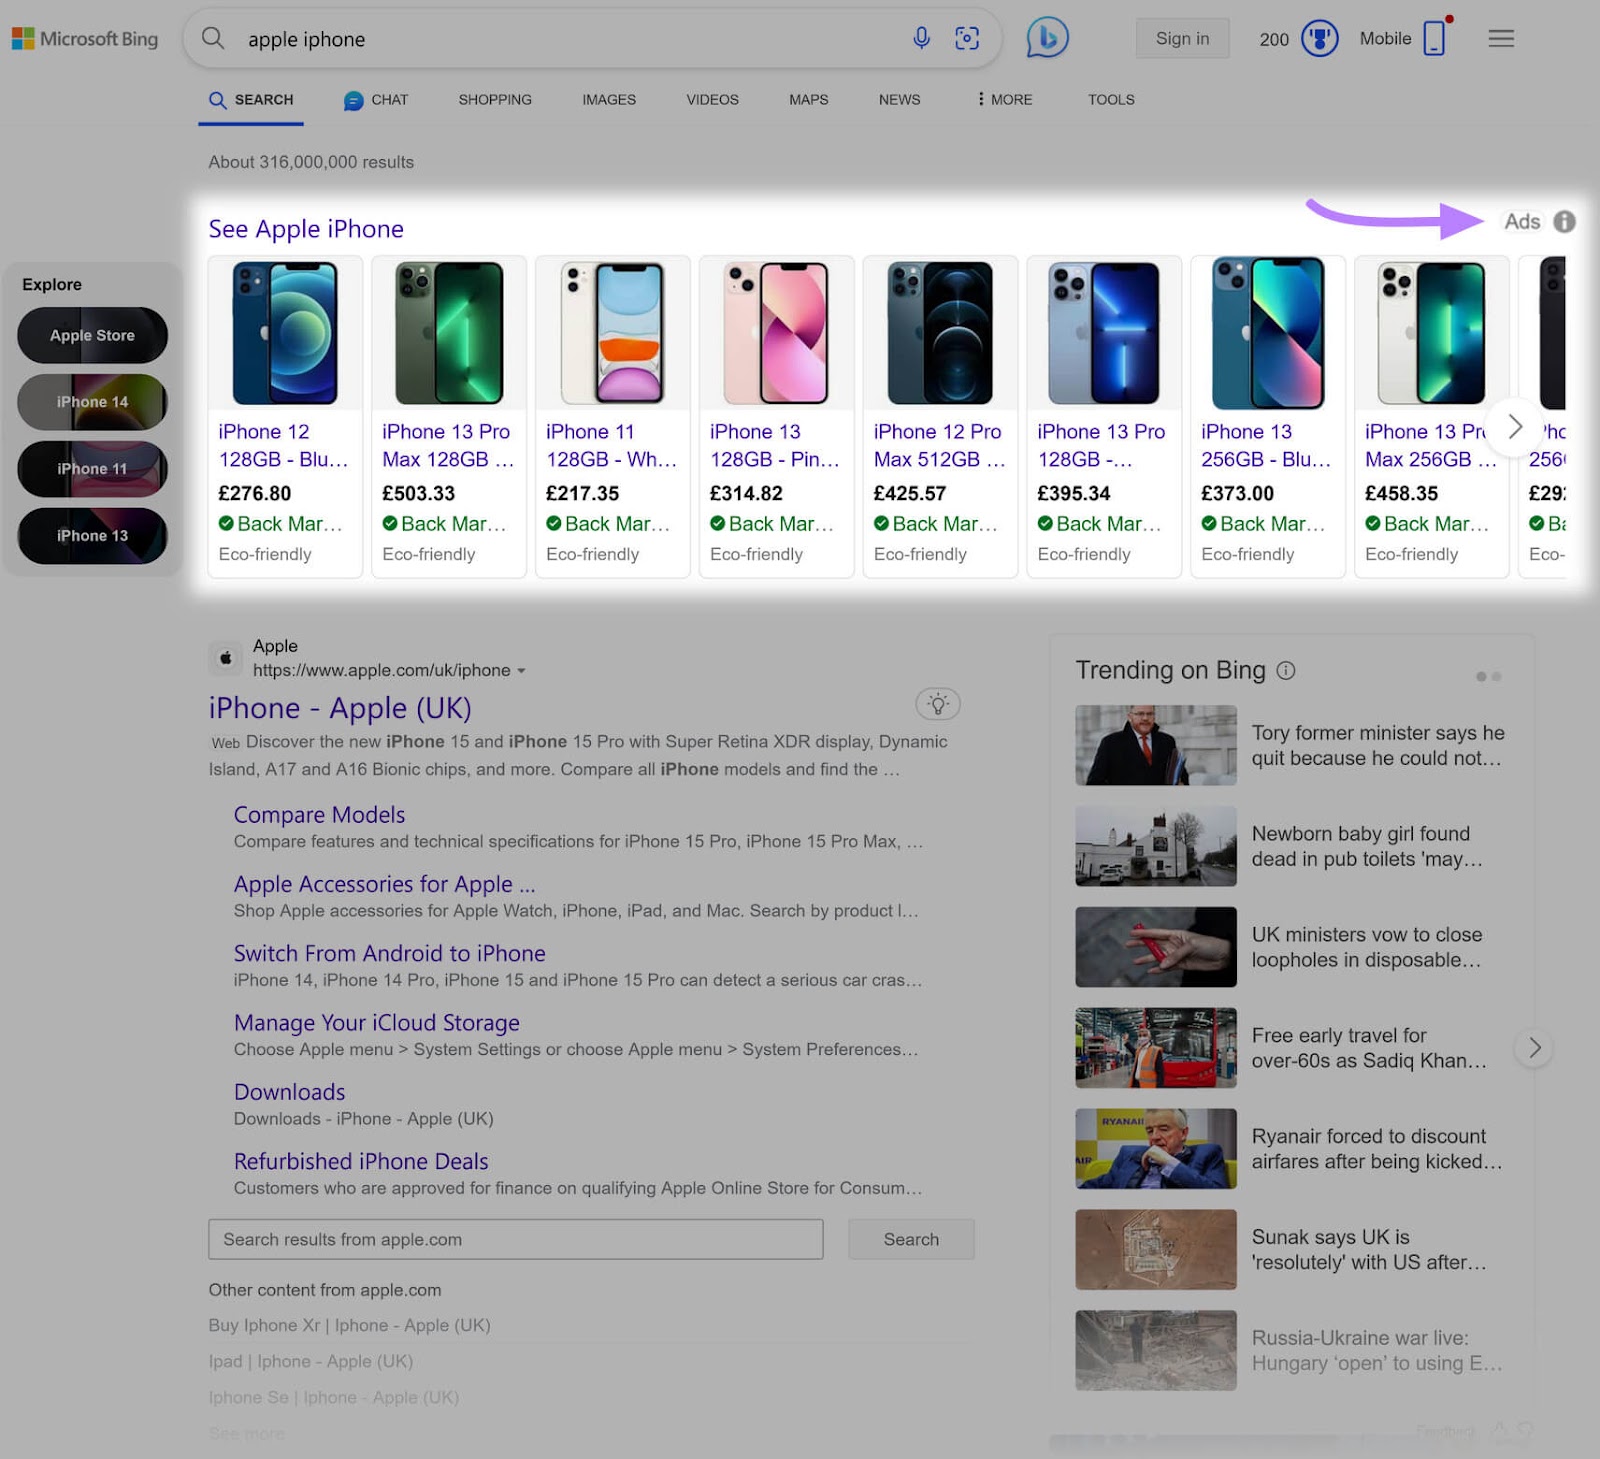 Paid listings connected  Bing's SERP person  “Ads” label